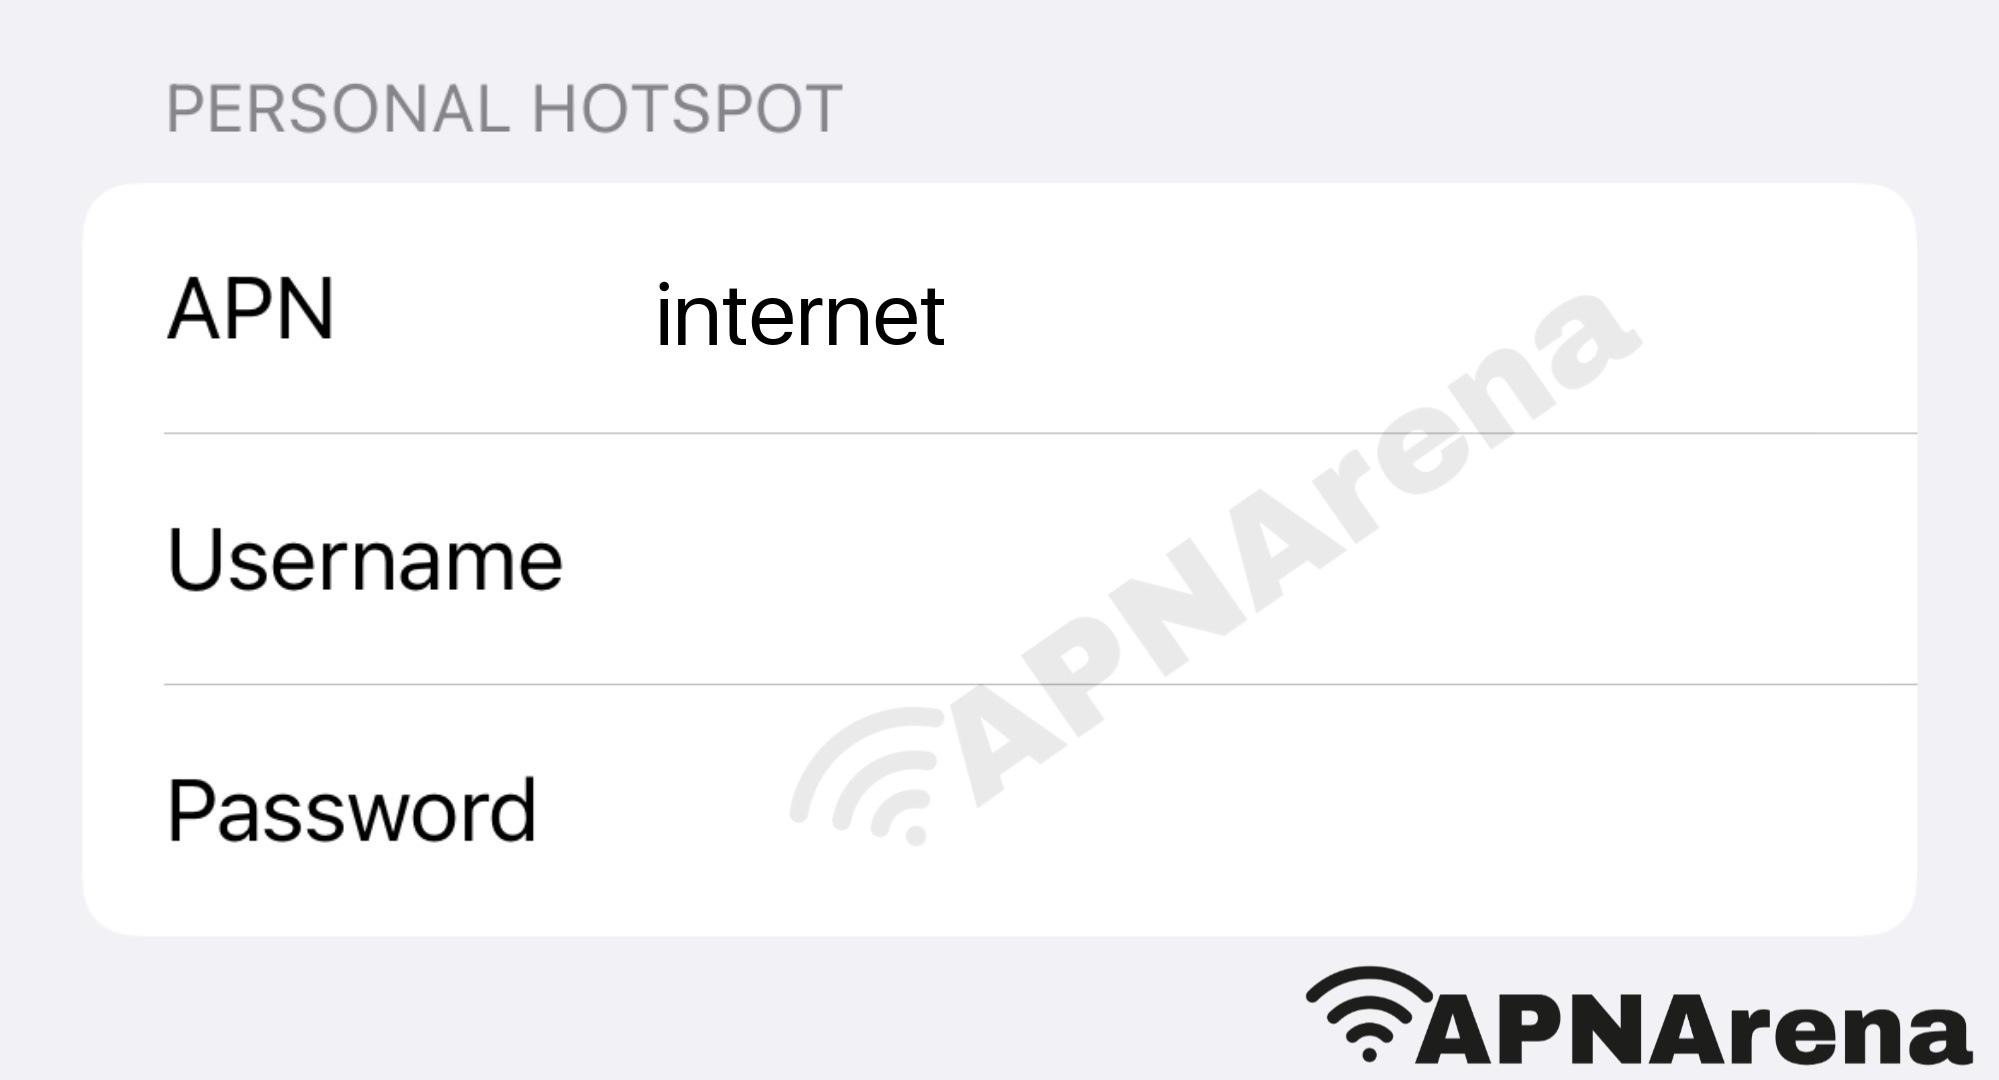 Cable & Wireless Panama Personal Hotspot Settings for iPhone